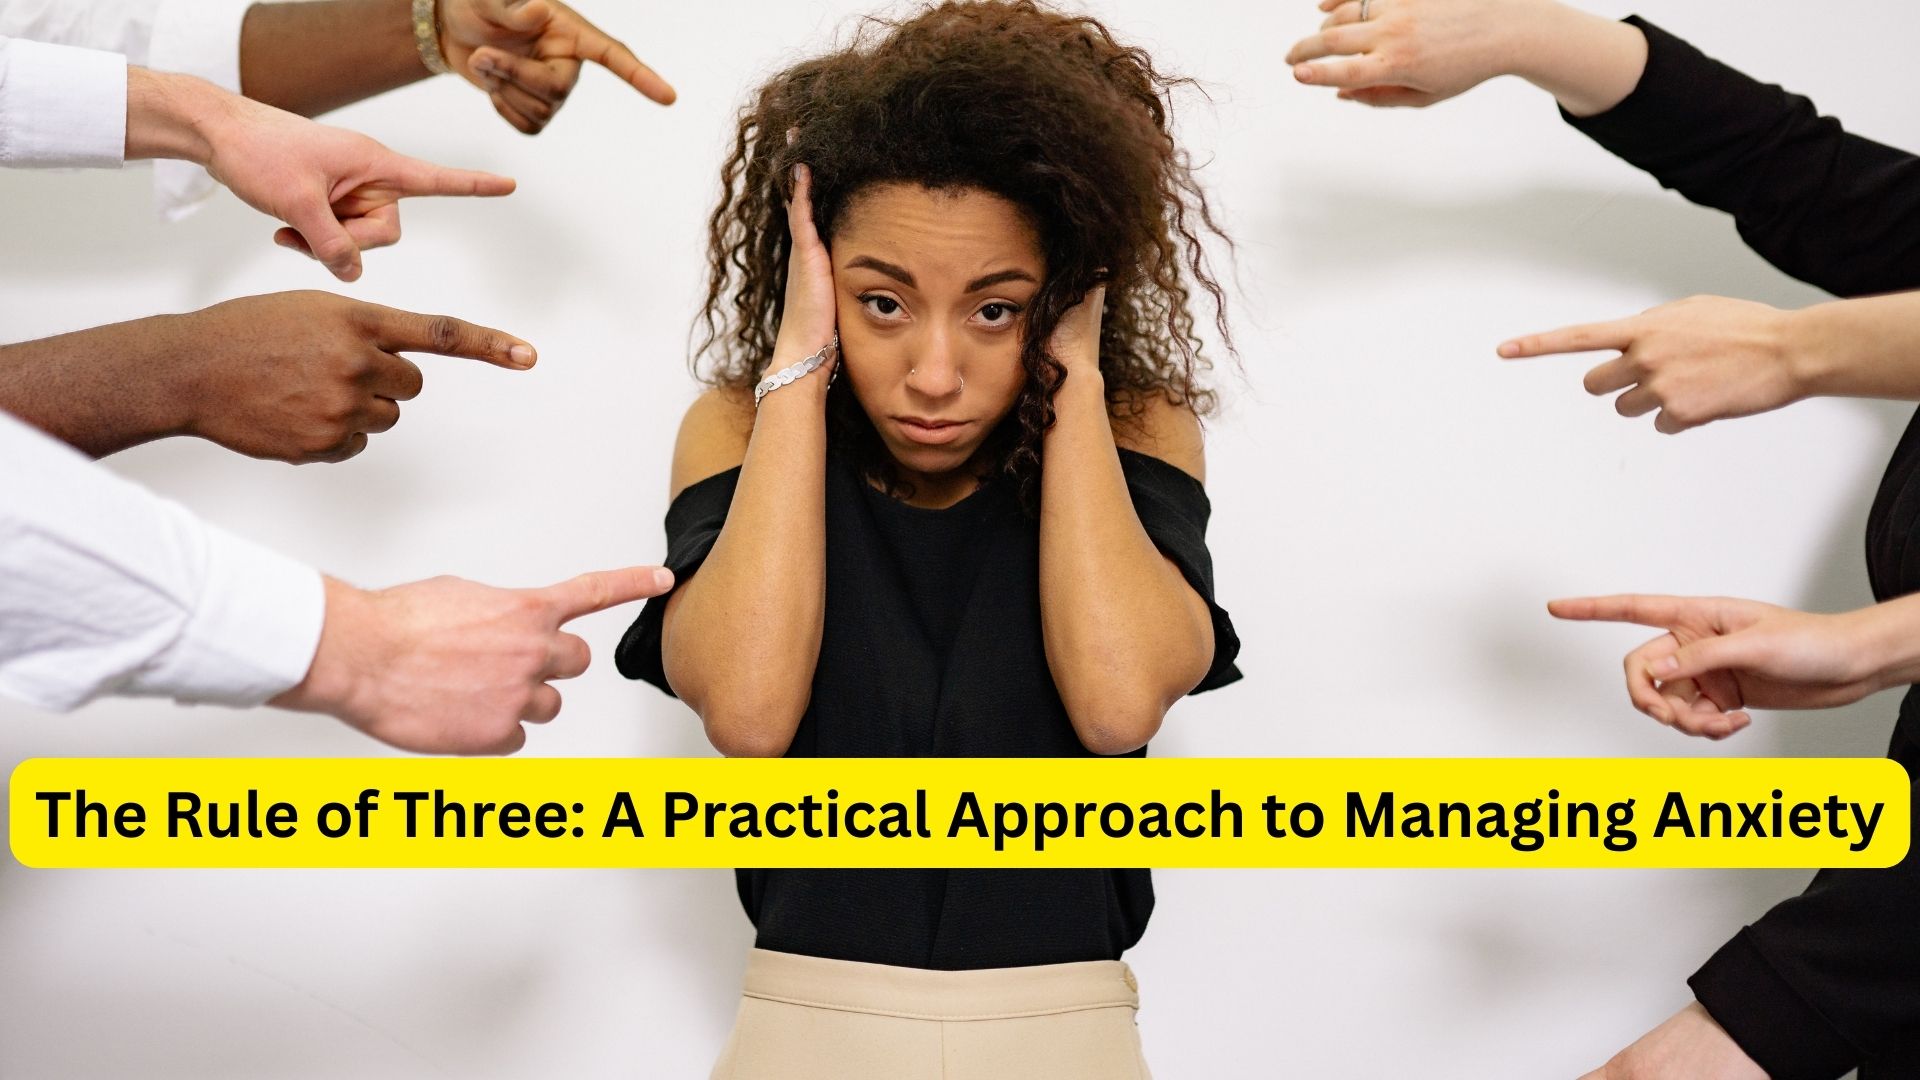 The Rule of Three: A Practical Approach to Managing Anxiety